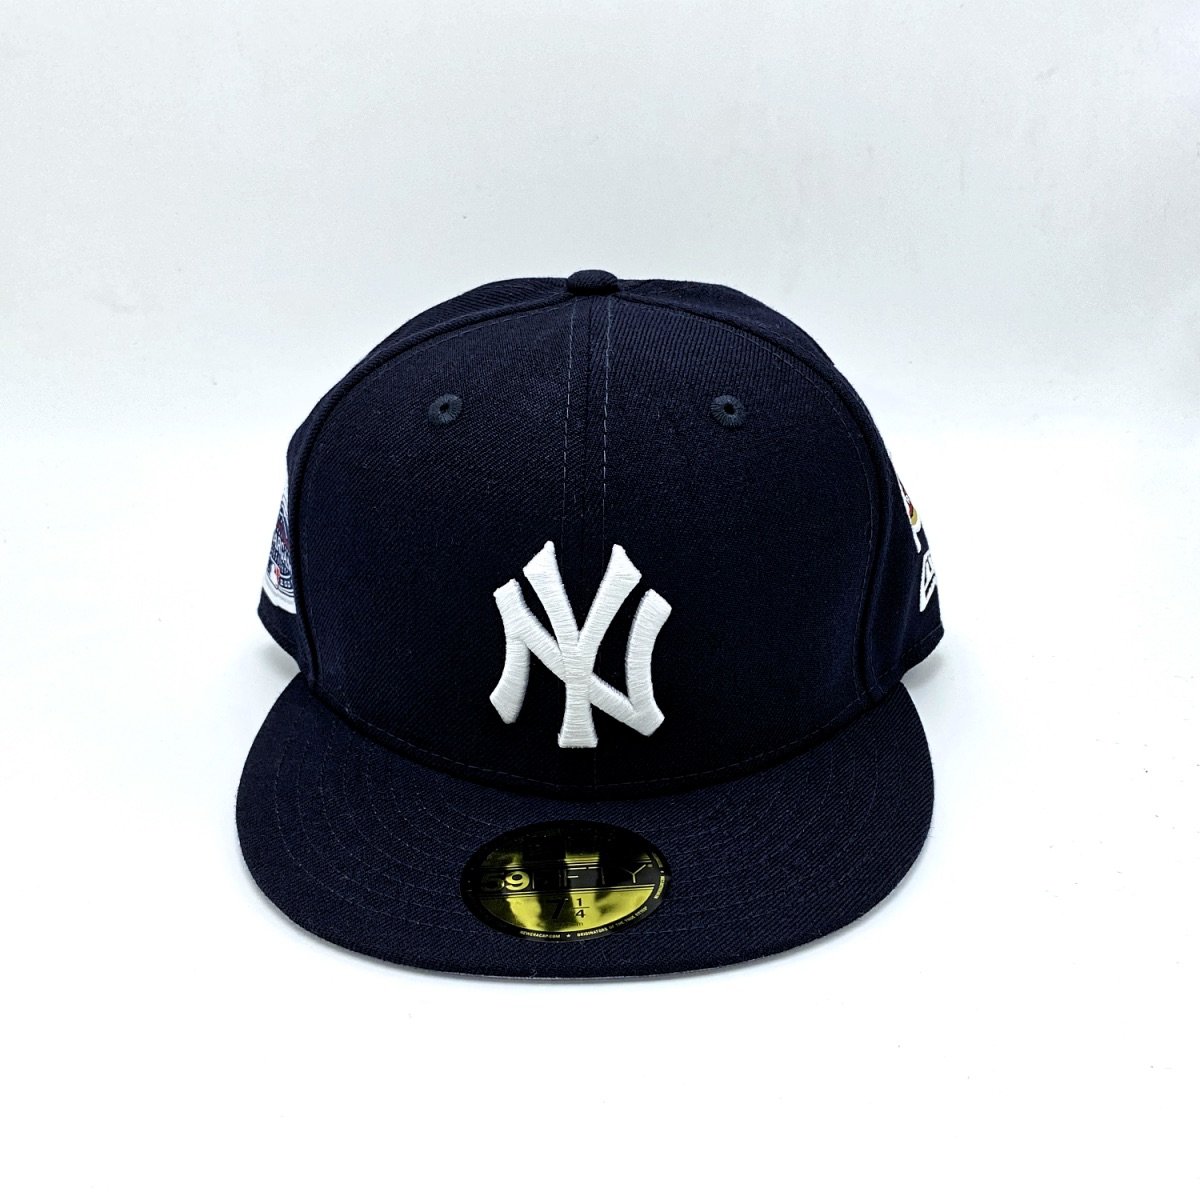 MAJOR for New York Yankees Stadium Status 59Fifty by New Era in